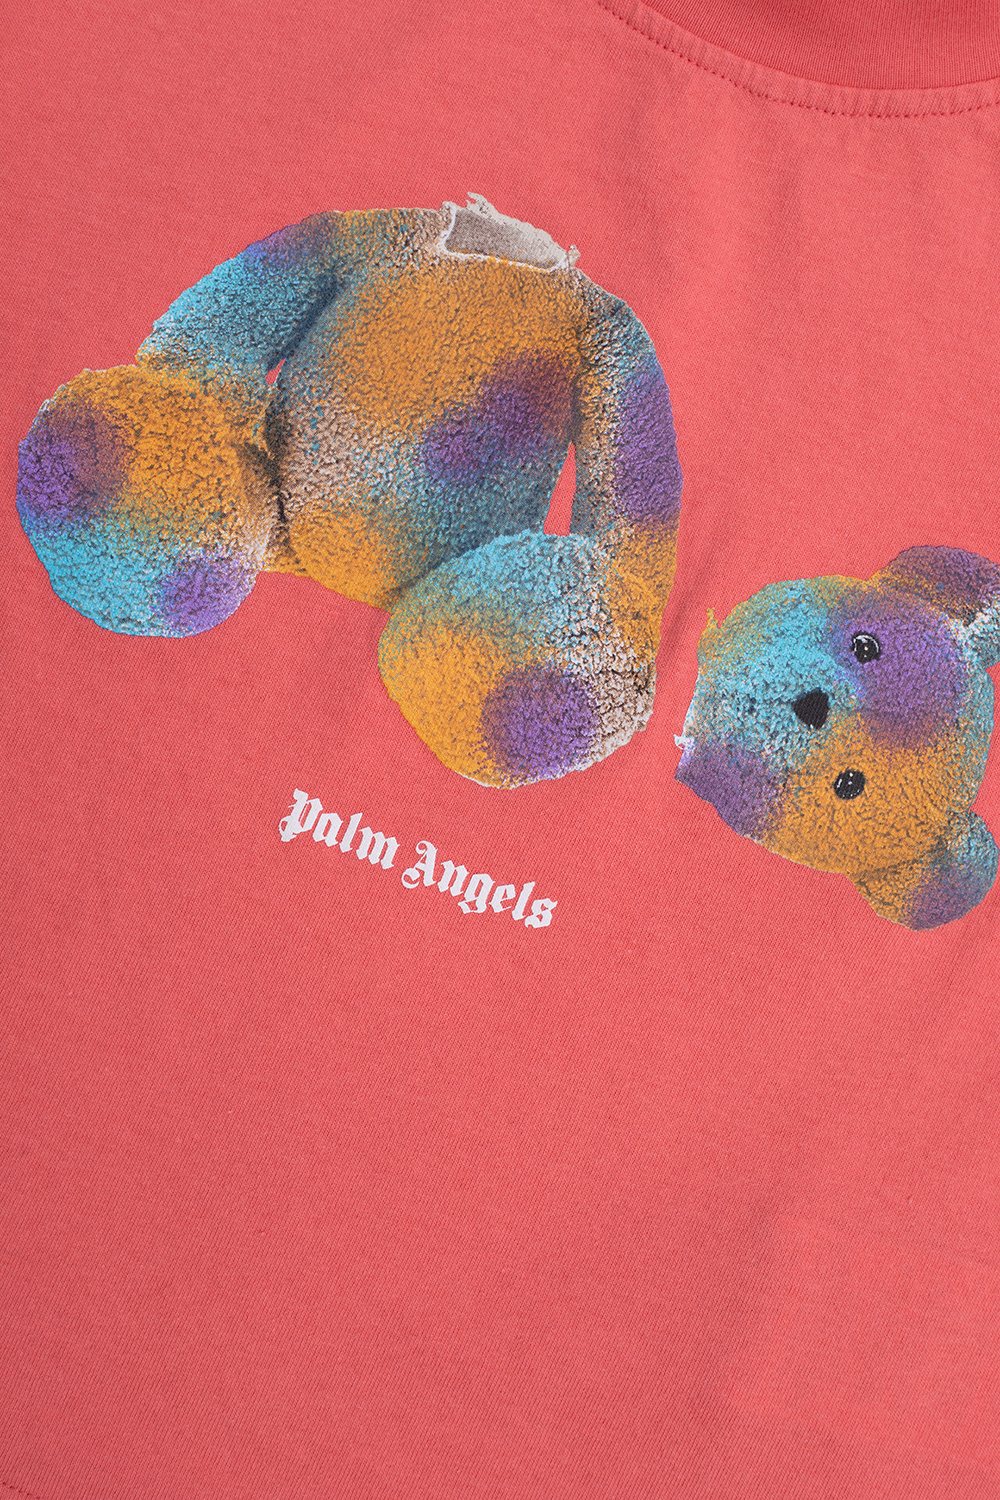 PALM ANGELS BEAR T-SHIRT in orange - Palm Angels® Official